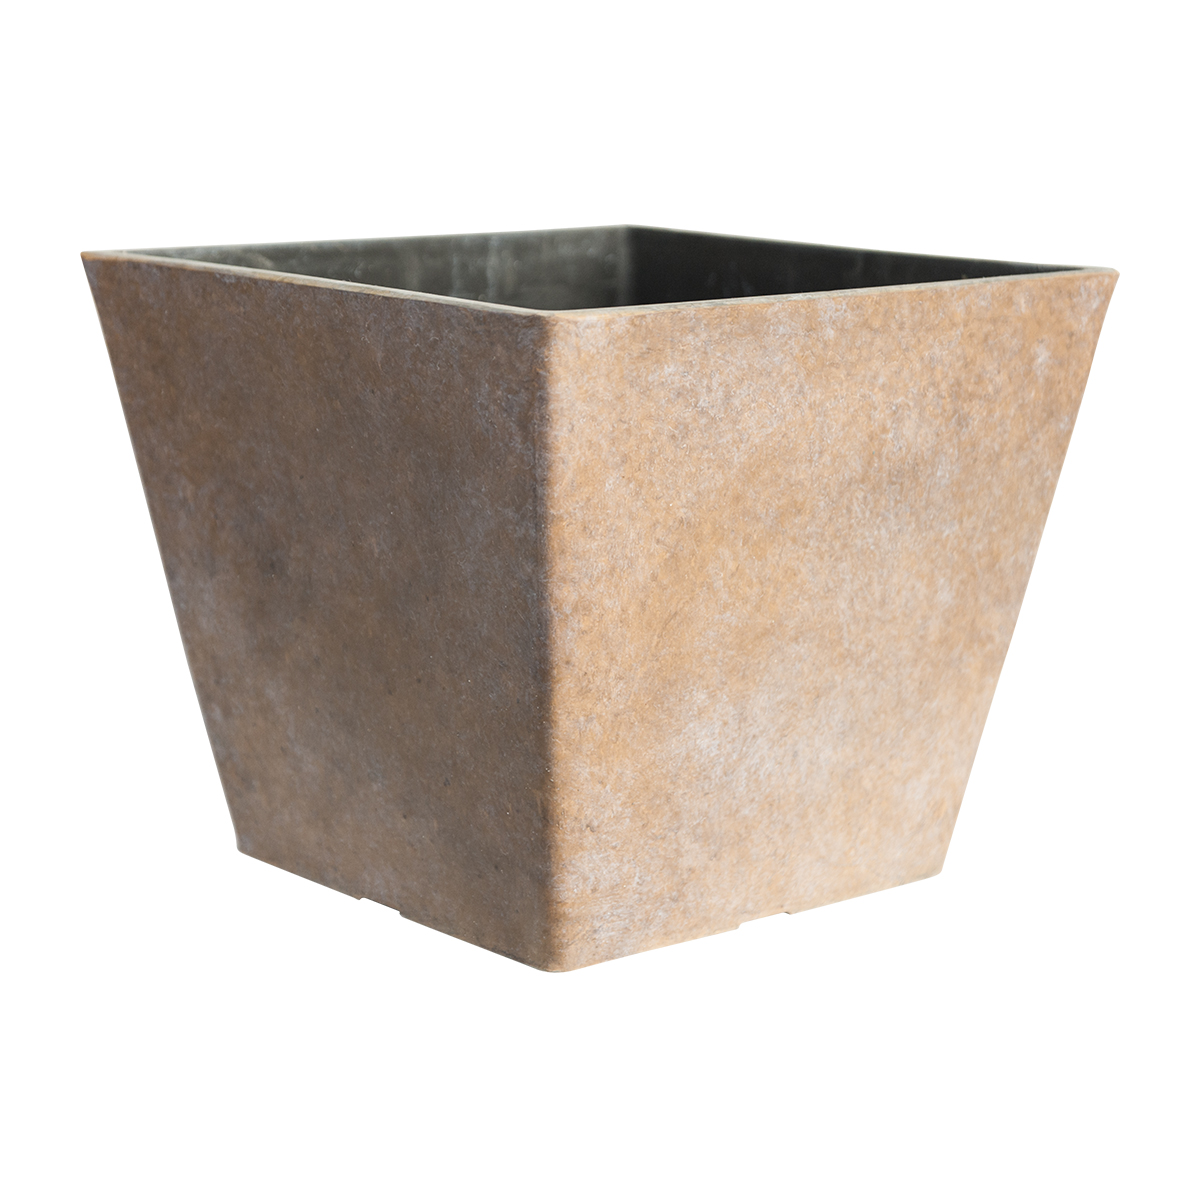 Large Recycled Plastic Square Plant Container